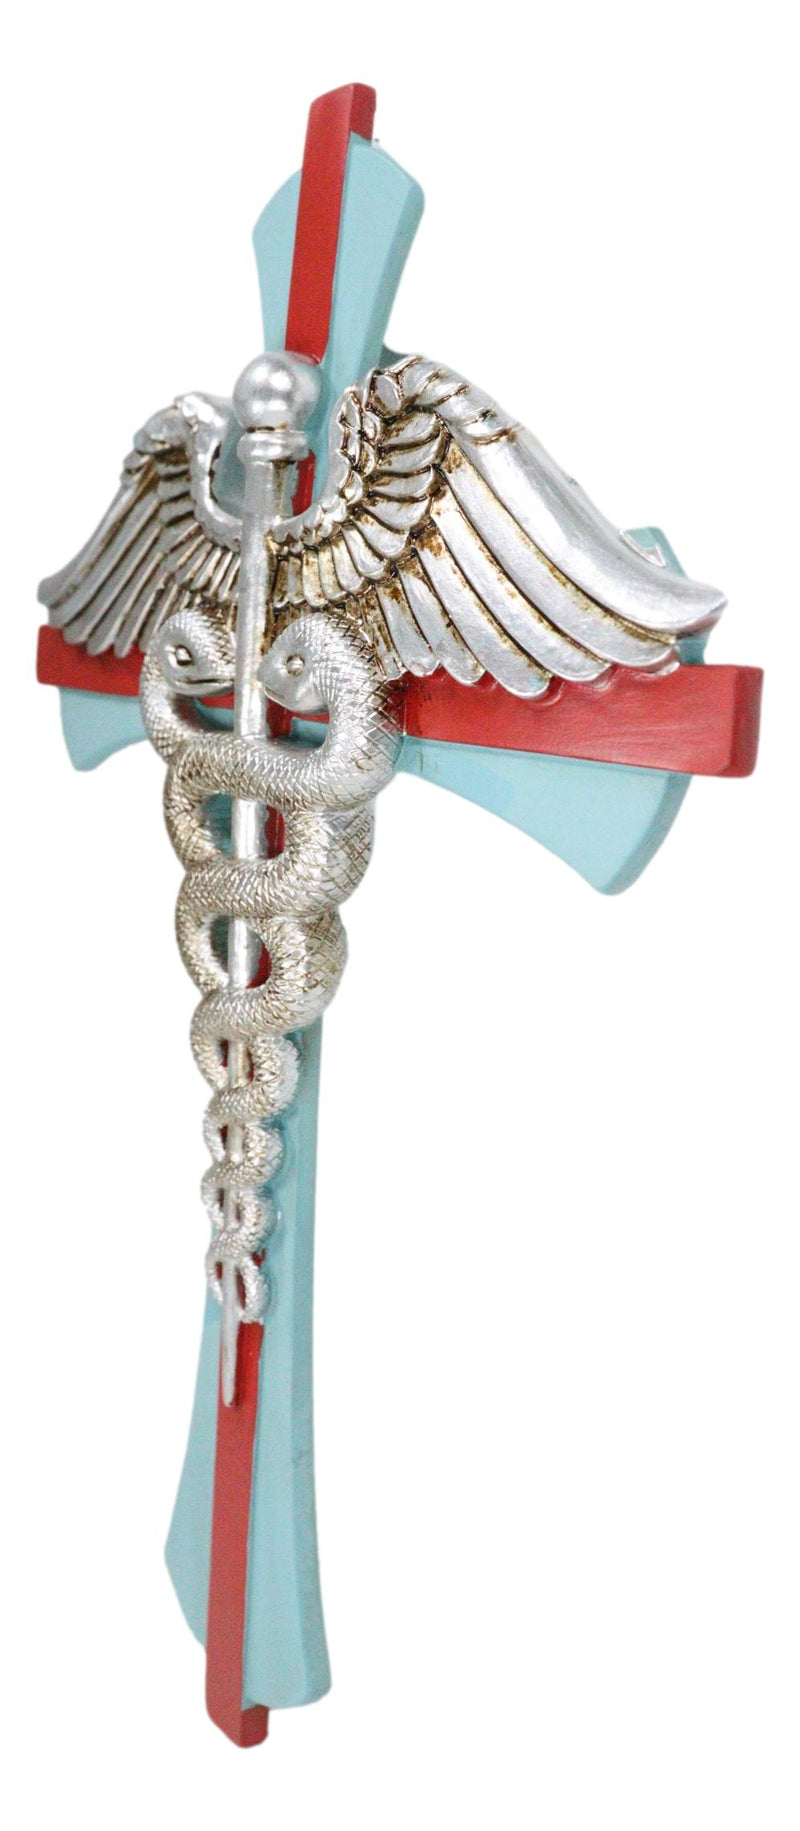 Physician Healer Caduceus Herald's Wand Entwined Serpents Winged Wall Cross